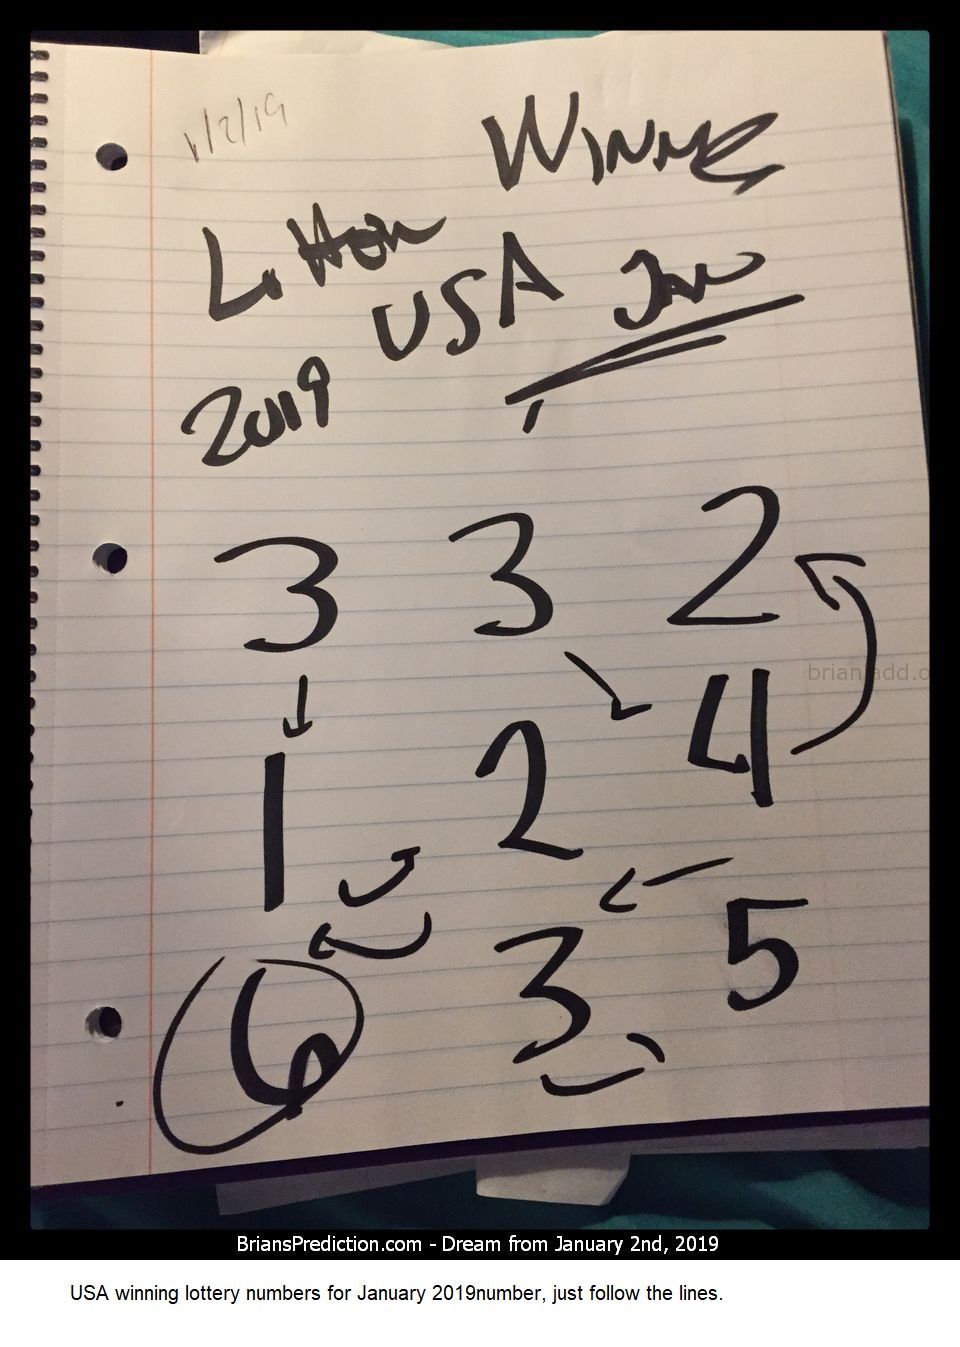 11523 2 January 2019 4 - Usa Winning Lottery Numbers For January 2019, Just Follow The Lines.  Dream Number 11523 2 Janu...
Usa Winning Lottery Numbers For January 2019, Just Follow The Lines.  Dream Number 11523 2 January 2019 4 Psychic Prediction
